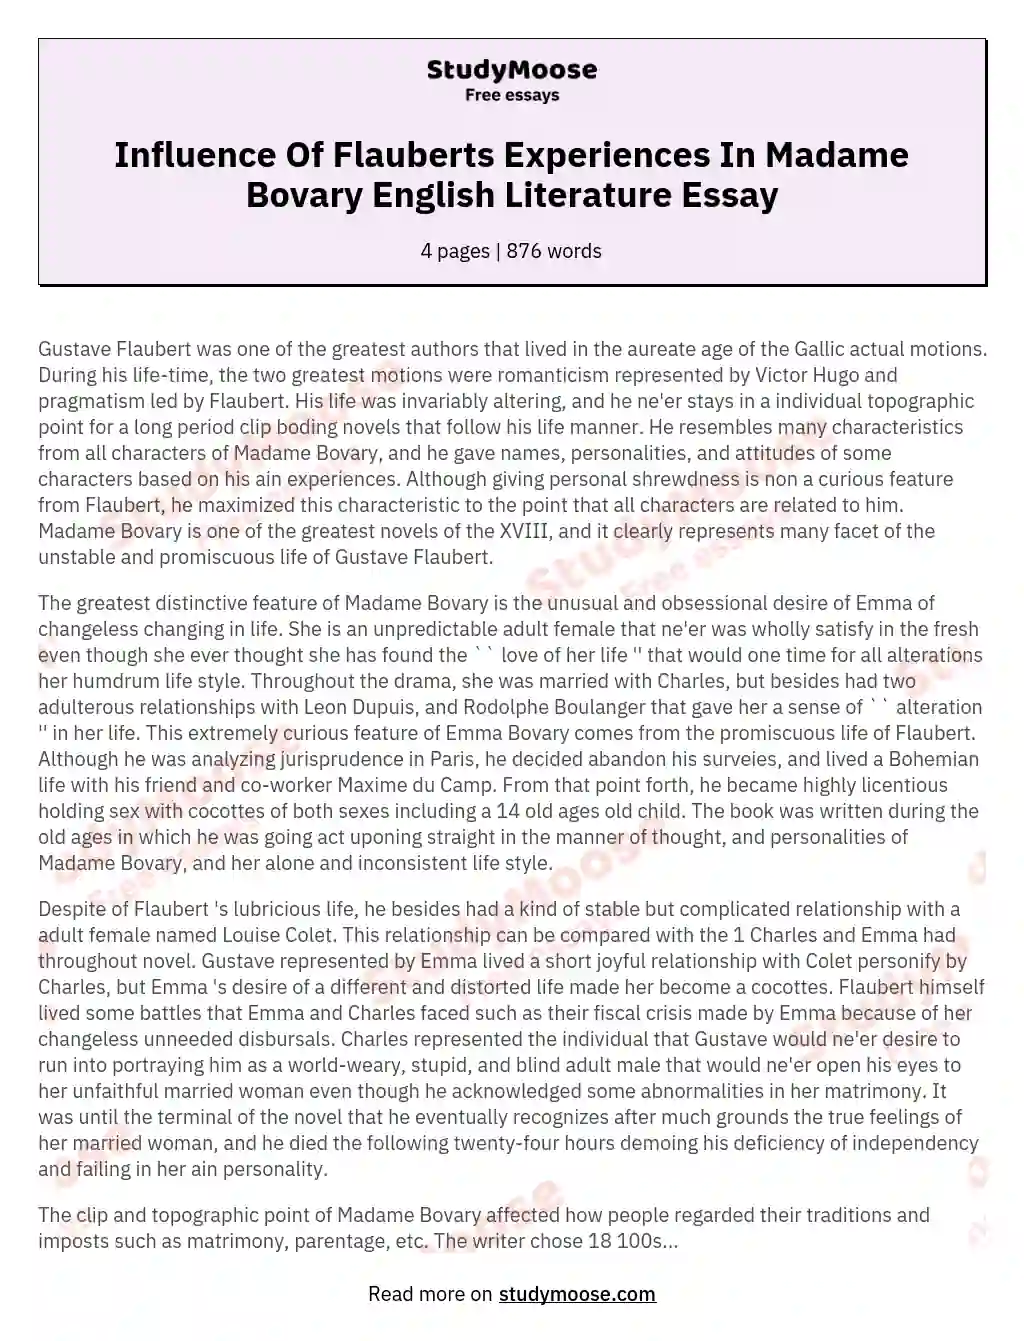 Influence Of Flauberts Experiences In Madame Bovary English Literature Essay essay